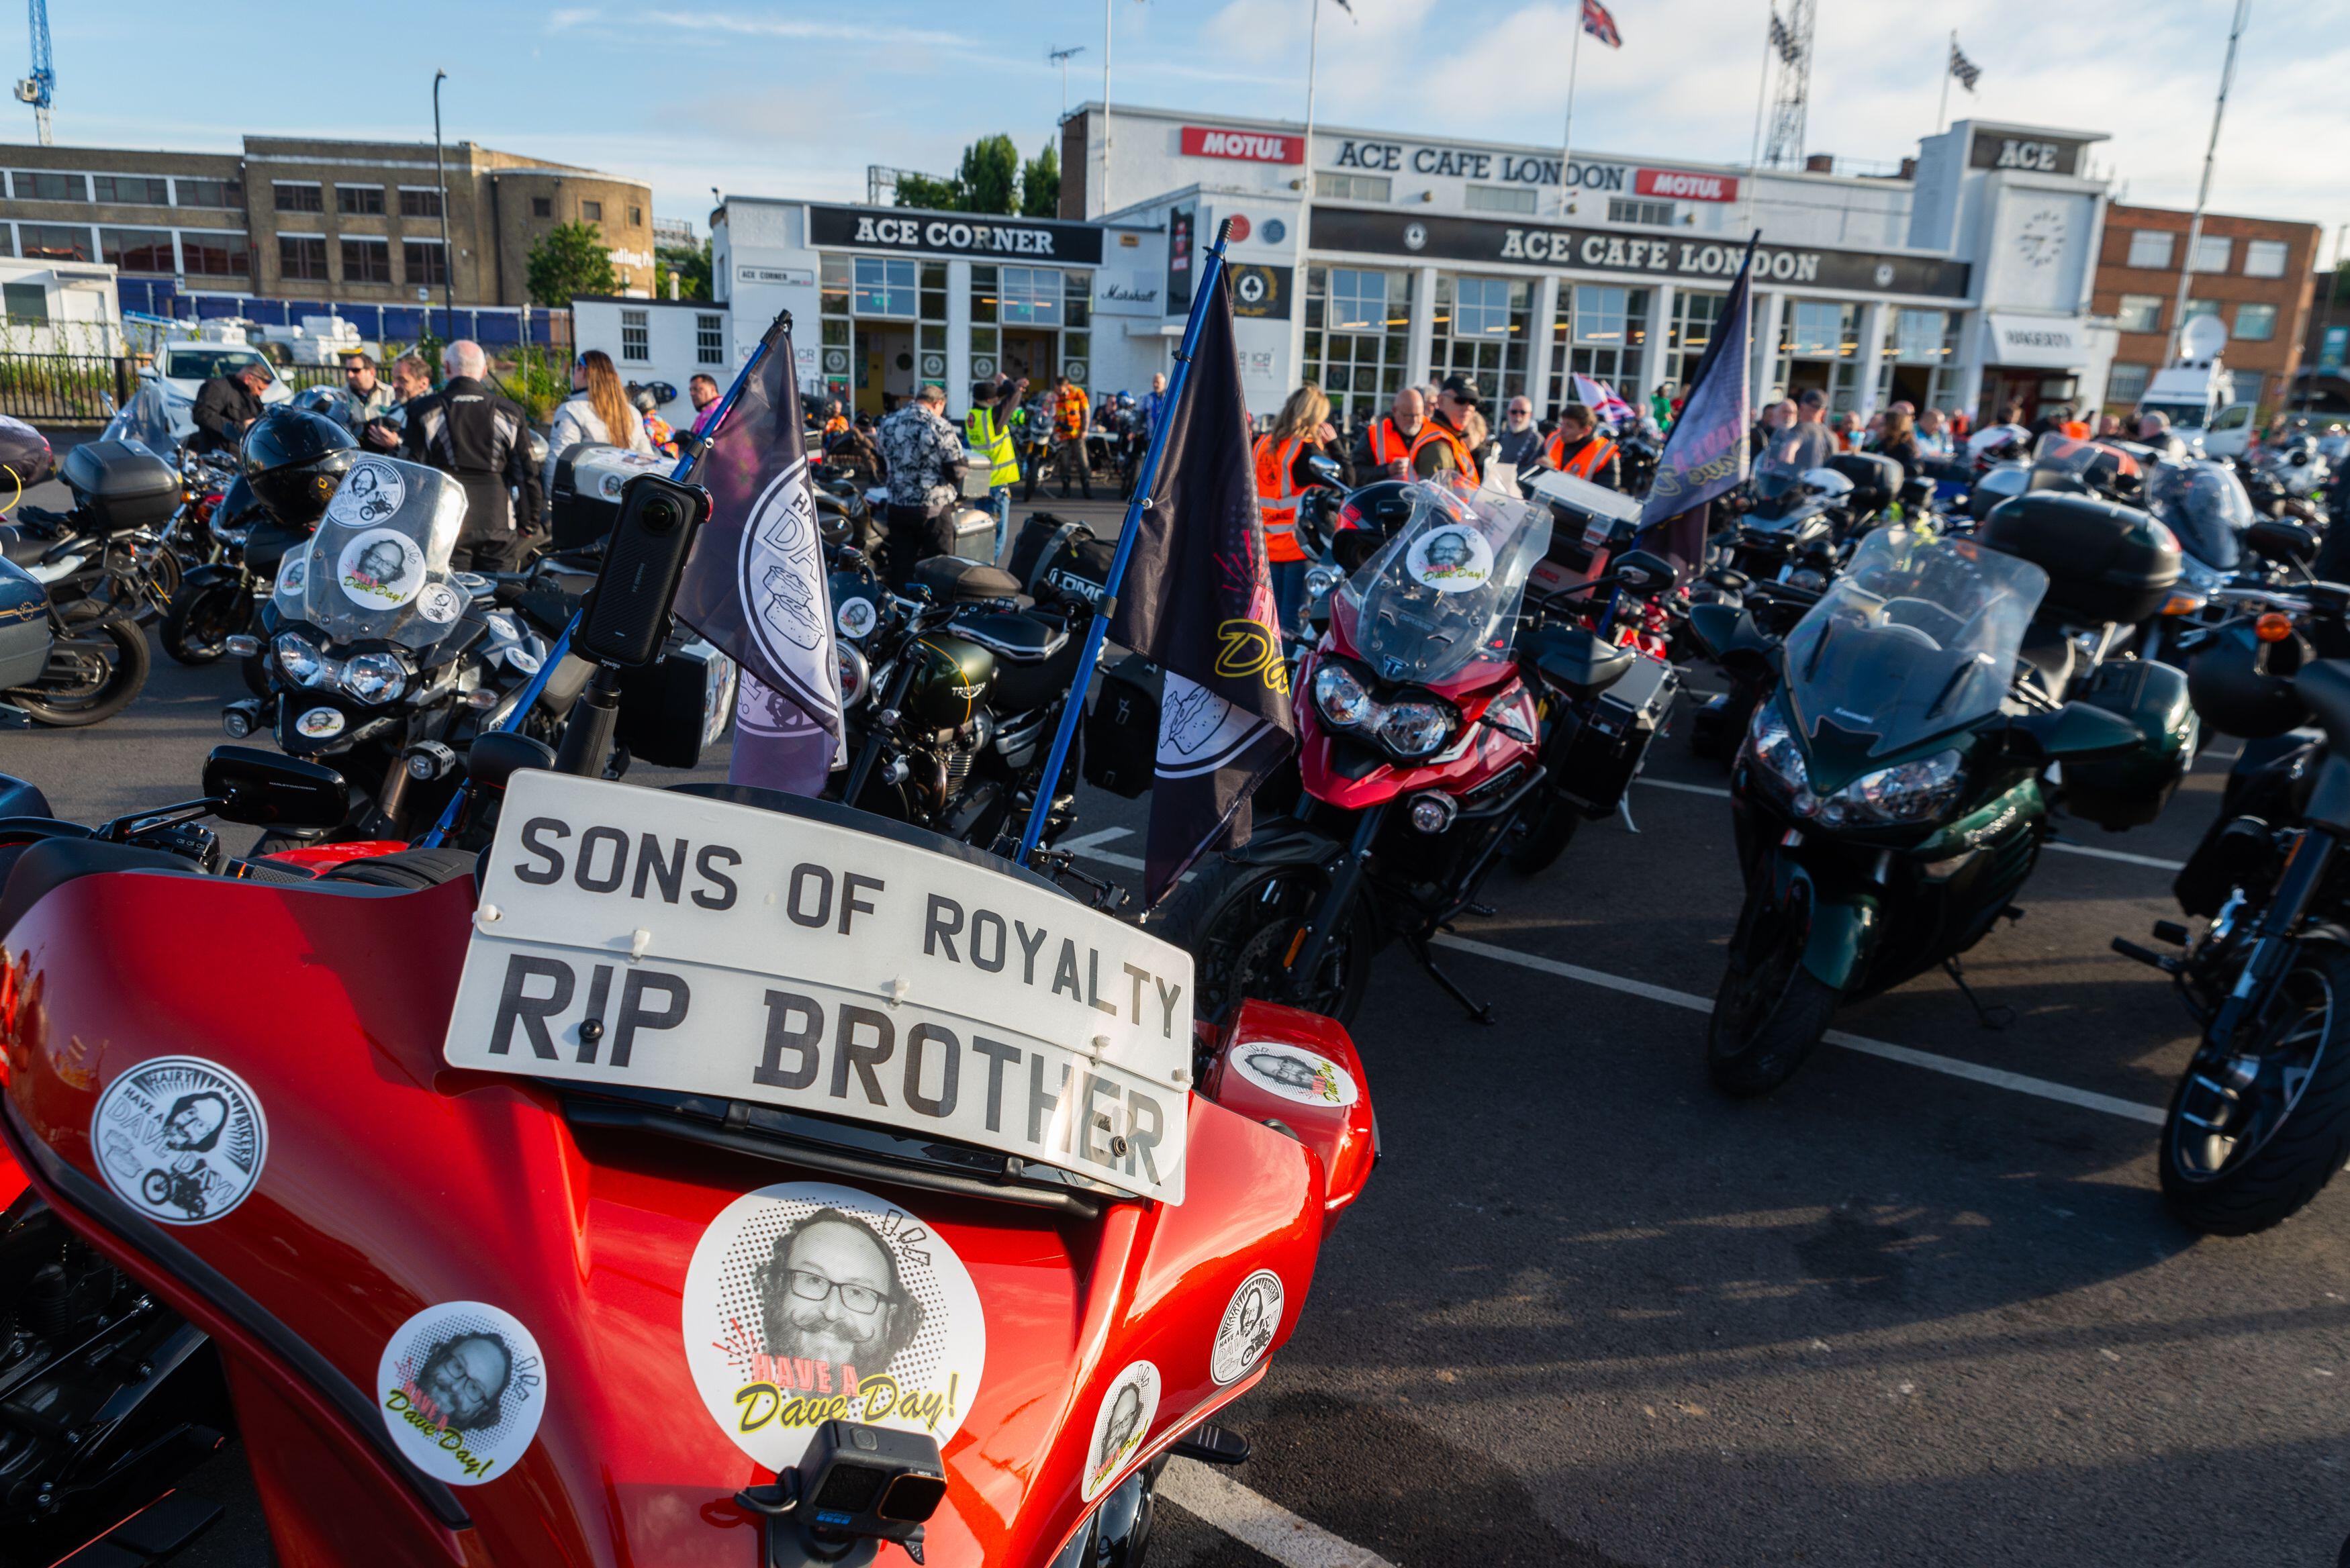 Thousands of riders will take on the route to Dave's home town